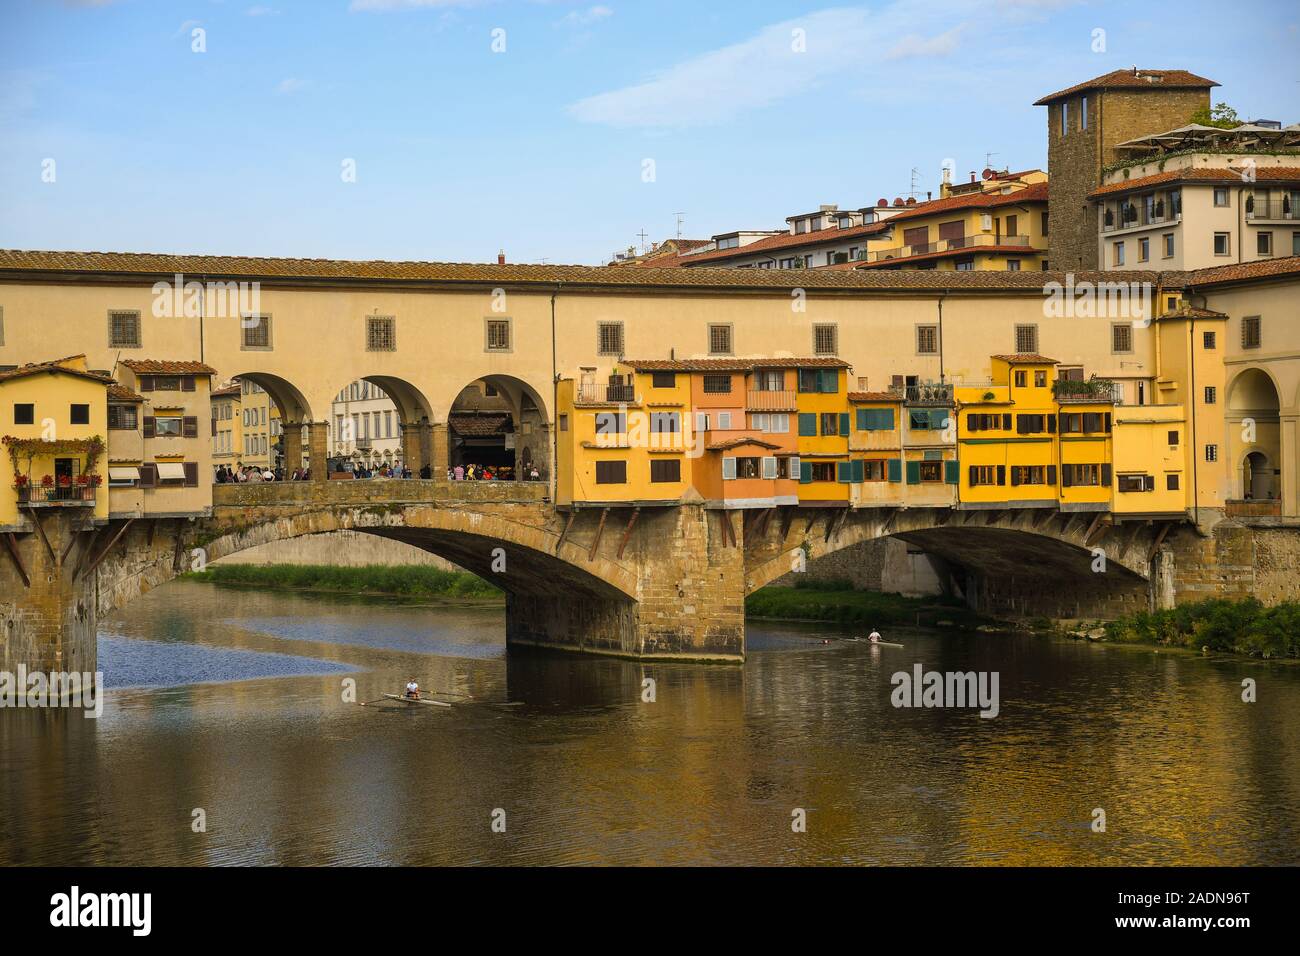 View of the famous Ponte Vecchio bridge in the historic centre of Florence, Unesco W.H. Site, with two men rowing on the Arno River, Tuscany, Italy Stock Photo